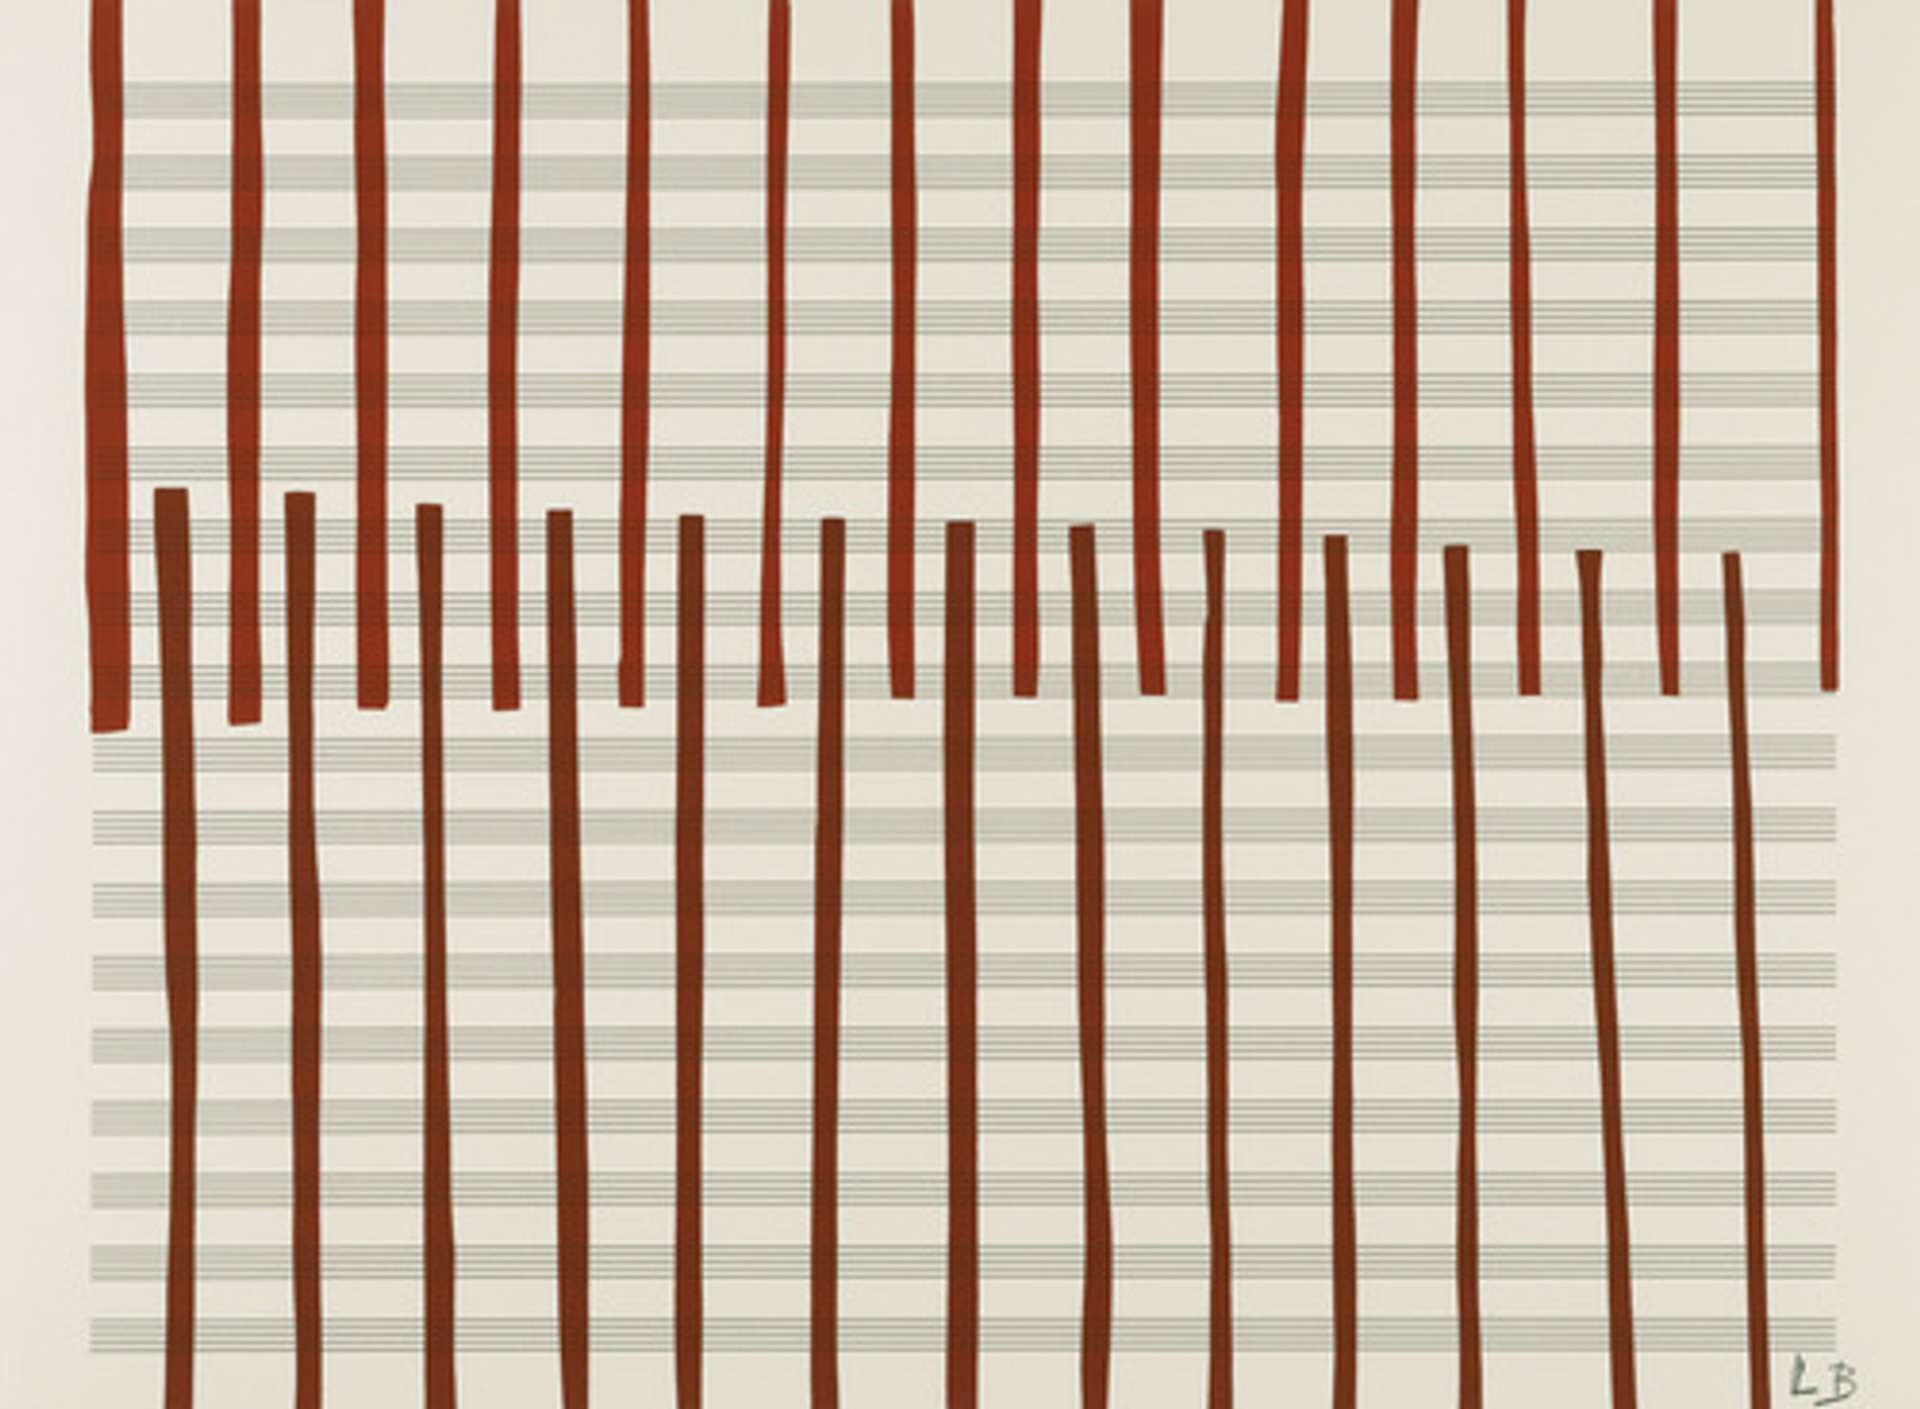 In this geometric print by Louise Bourgeois, two rows of opposing burgundy vertical lines lightly overlap one another in the centre of the canvas.